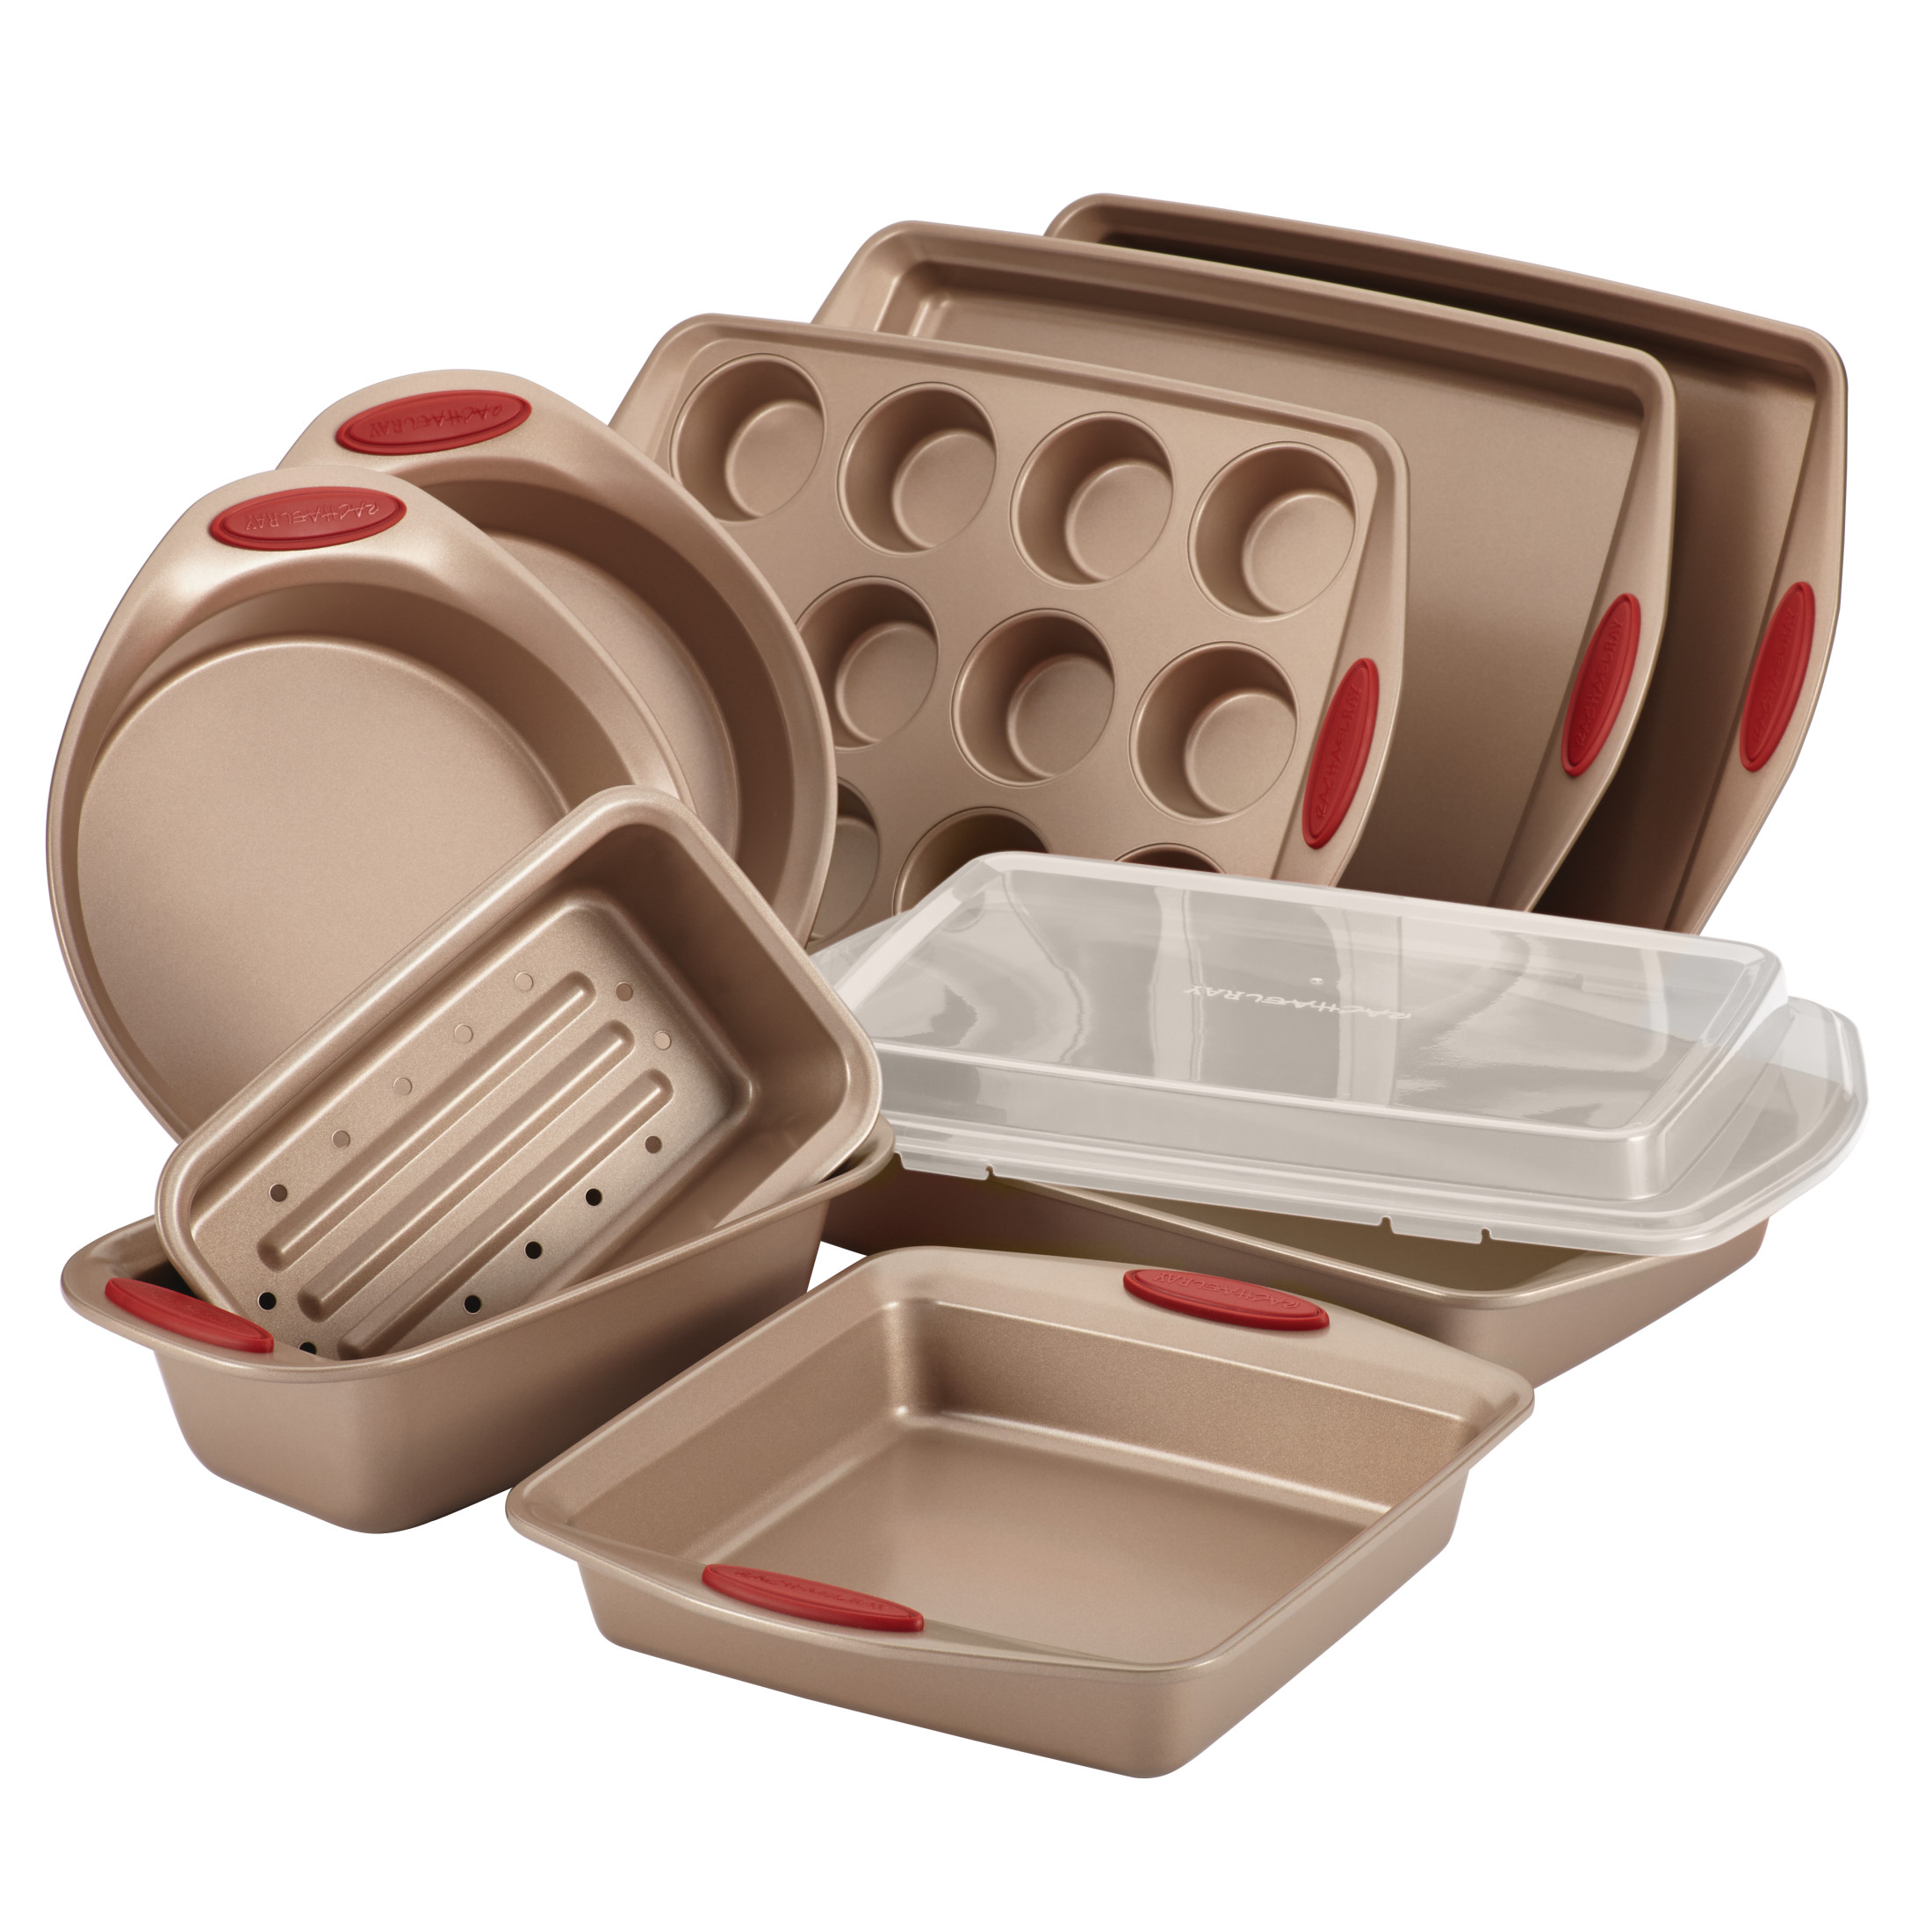 Rachael Ray 10-Piece Cucina Nonstick Bakeware Set, Brown with Red Handles - image 1 of 17